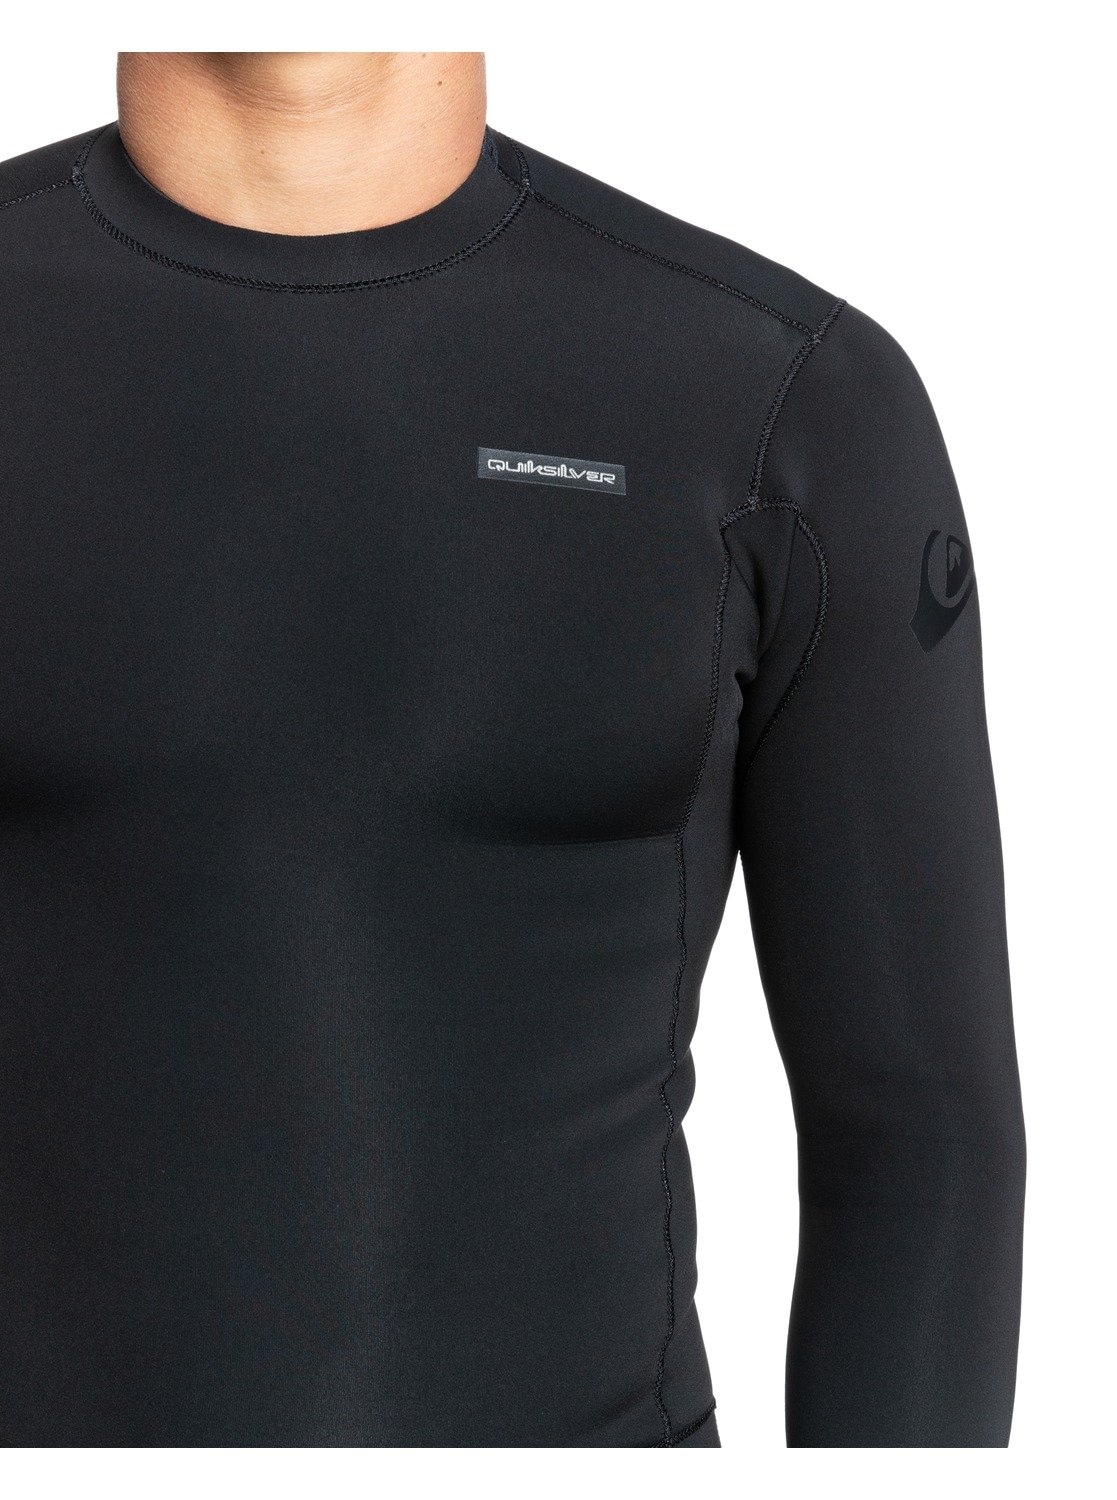 Quiksilver Neoprenanzug Everyday bei ♕ »2mm Sessions«